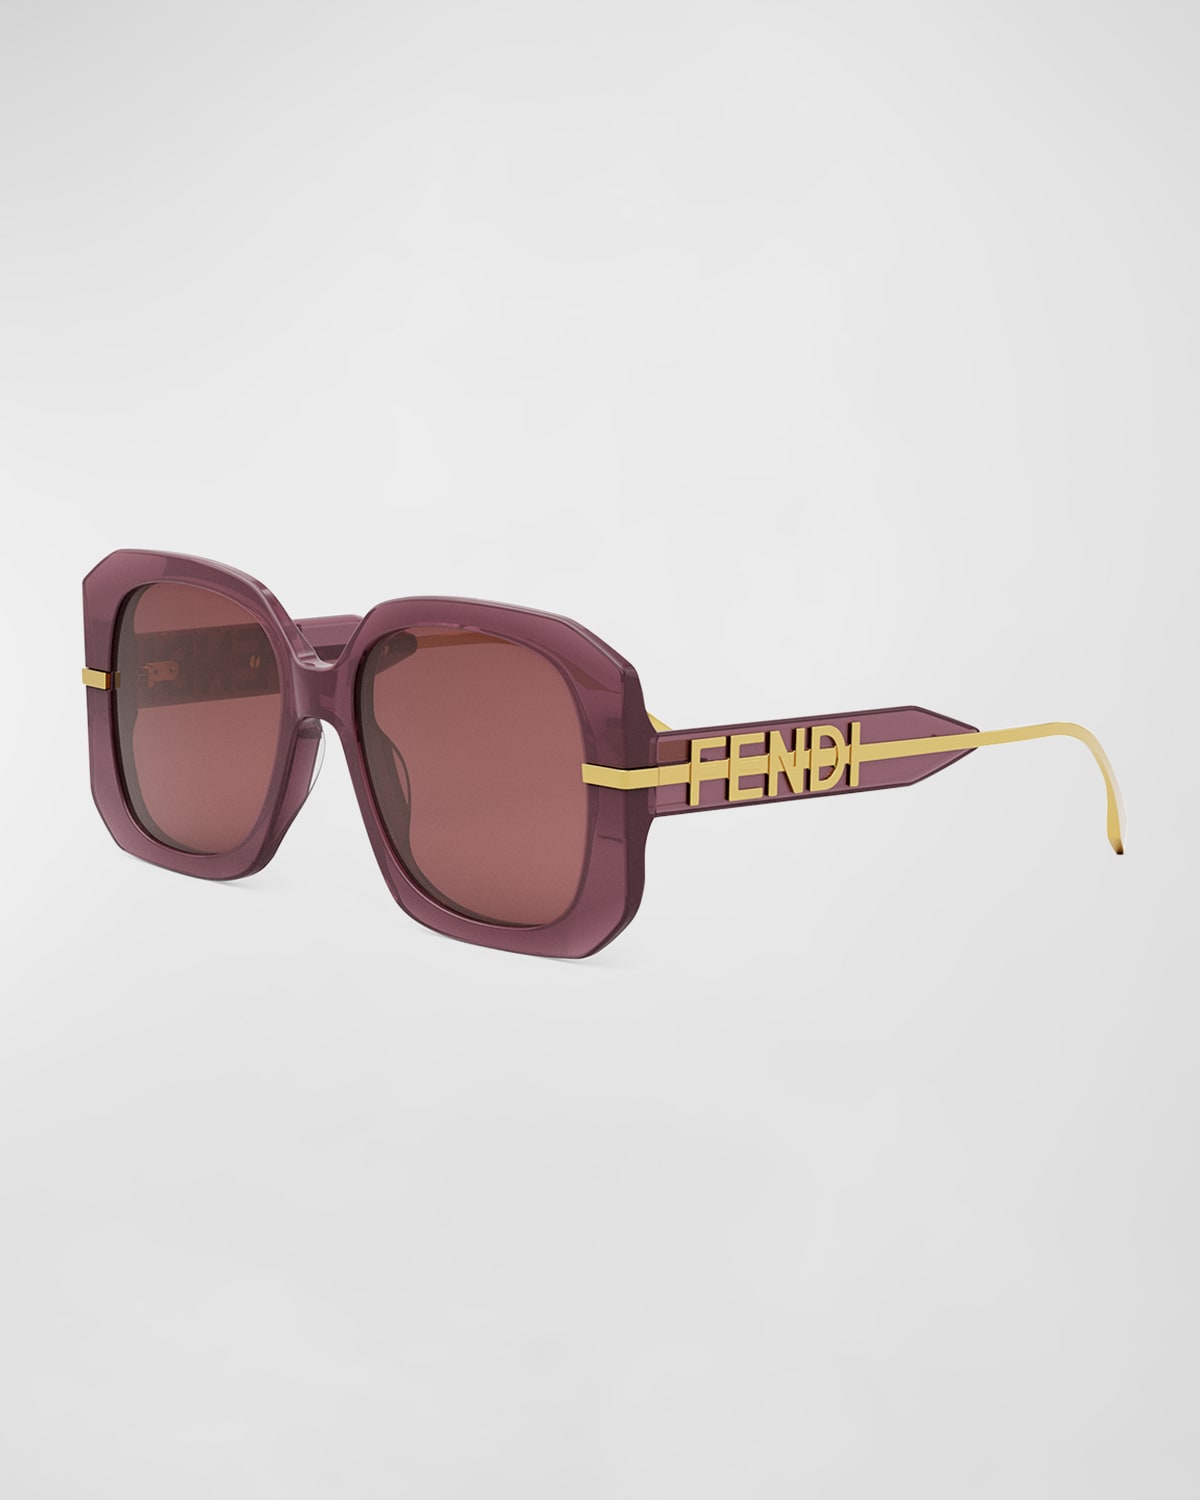 Fendigraphy Anagram Butterfly Acetate Sunglasses